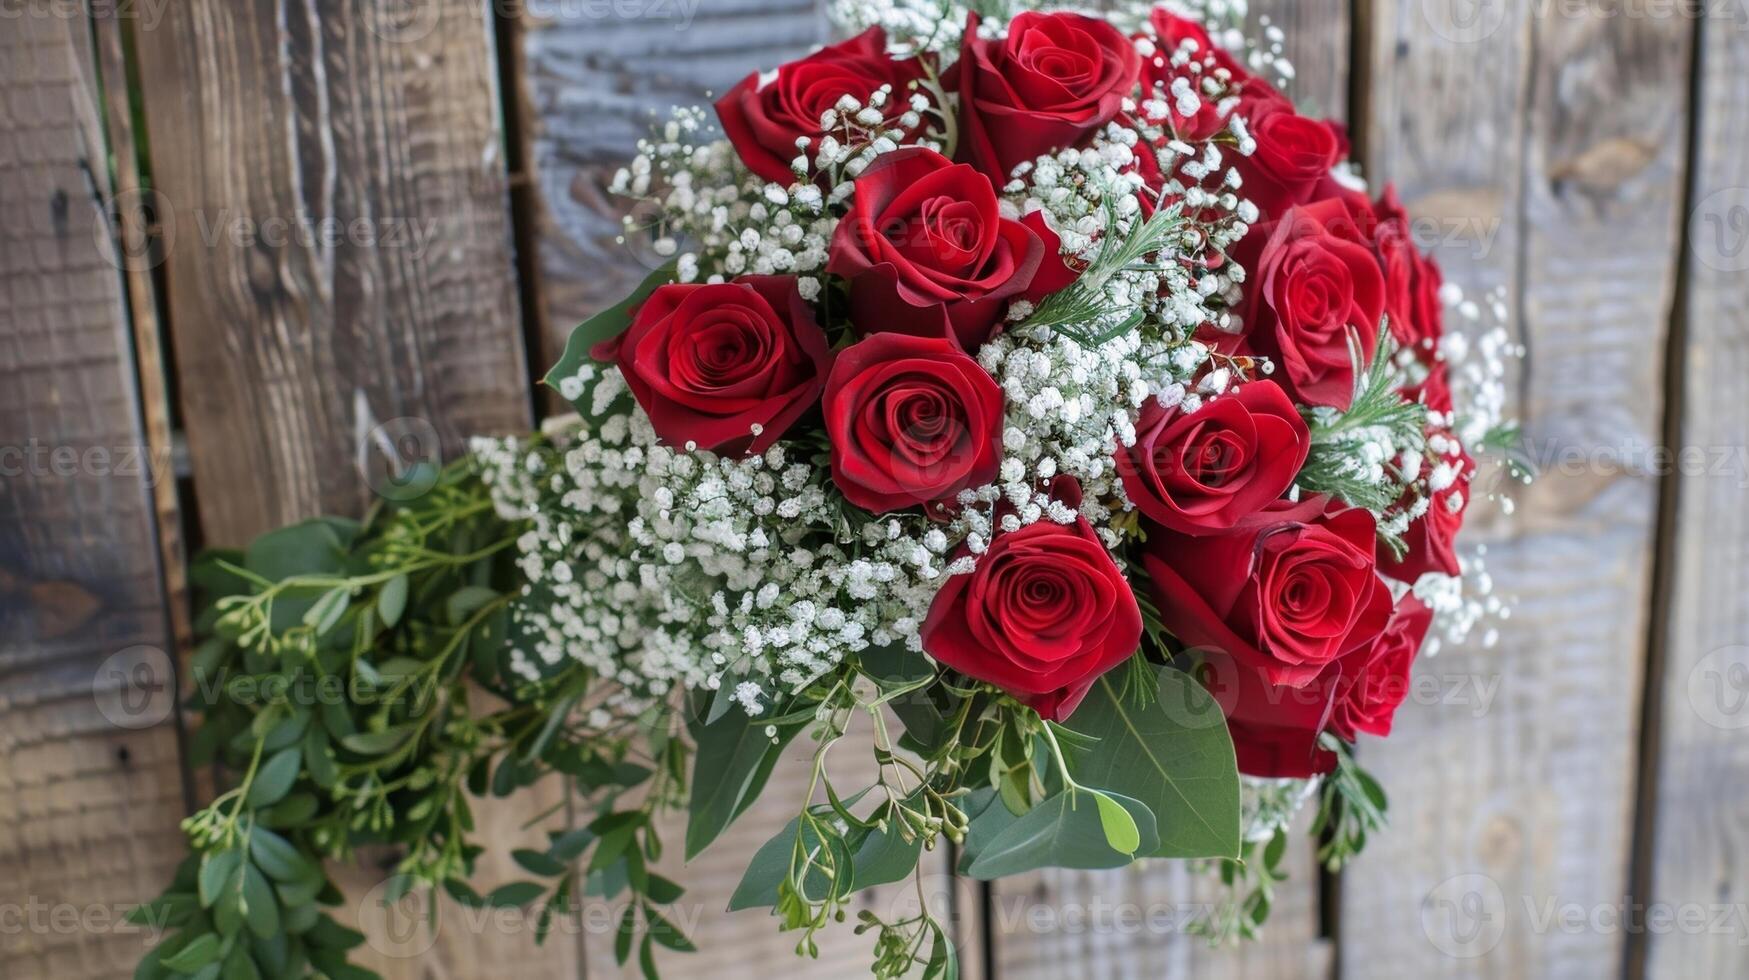 A finished bouquet of deep red roses delicate babys breath and cascading ivy the perfect centerpiece for a wedding or special event photo